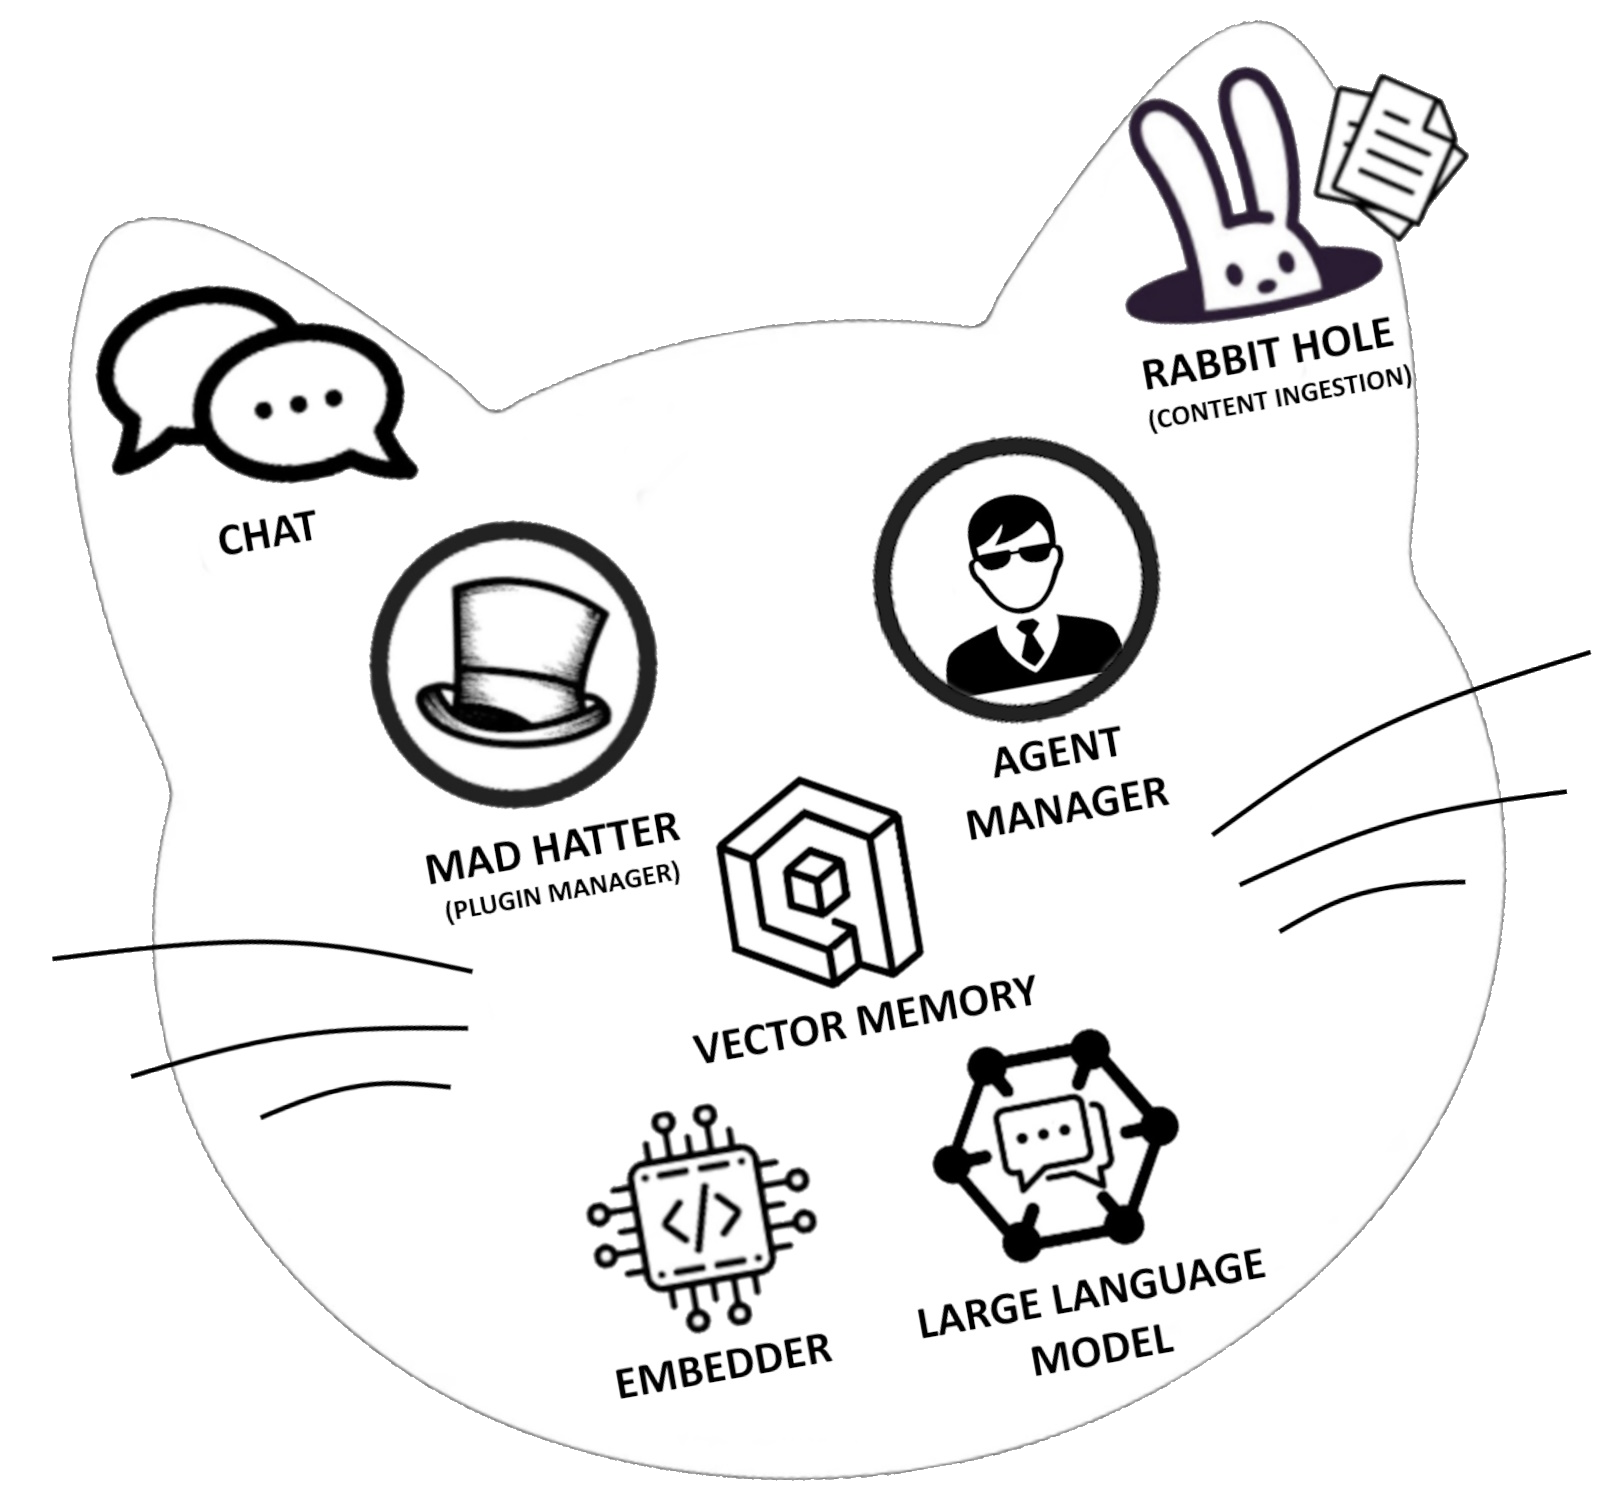 Schema of the Cheshire Cat components